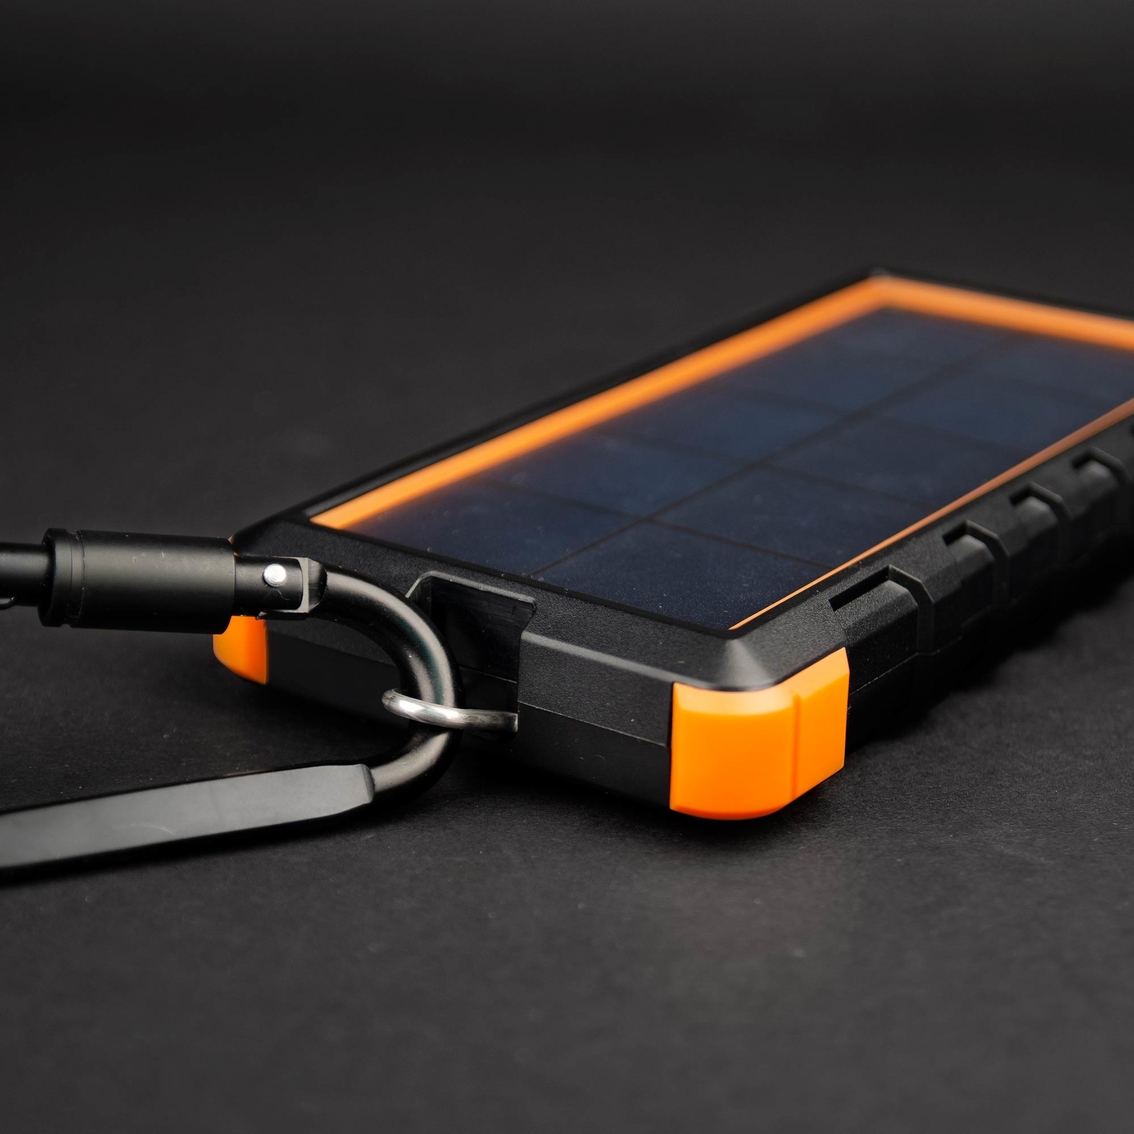 Toughtested 20,000mah Solar Powerbank, Cell Phone Batteries & Chargers, Electronics